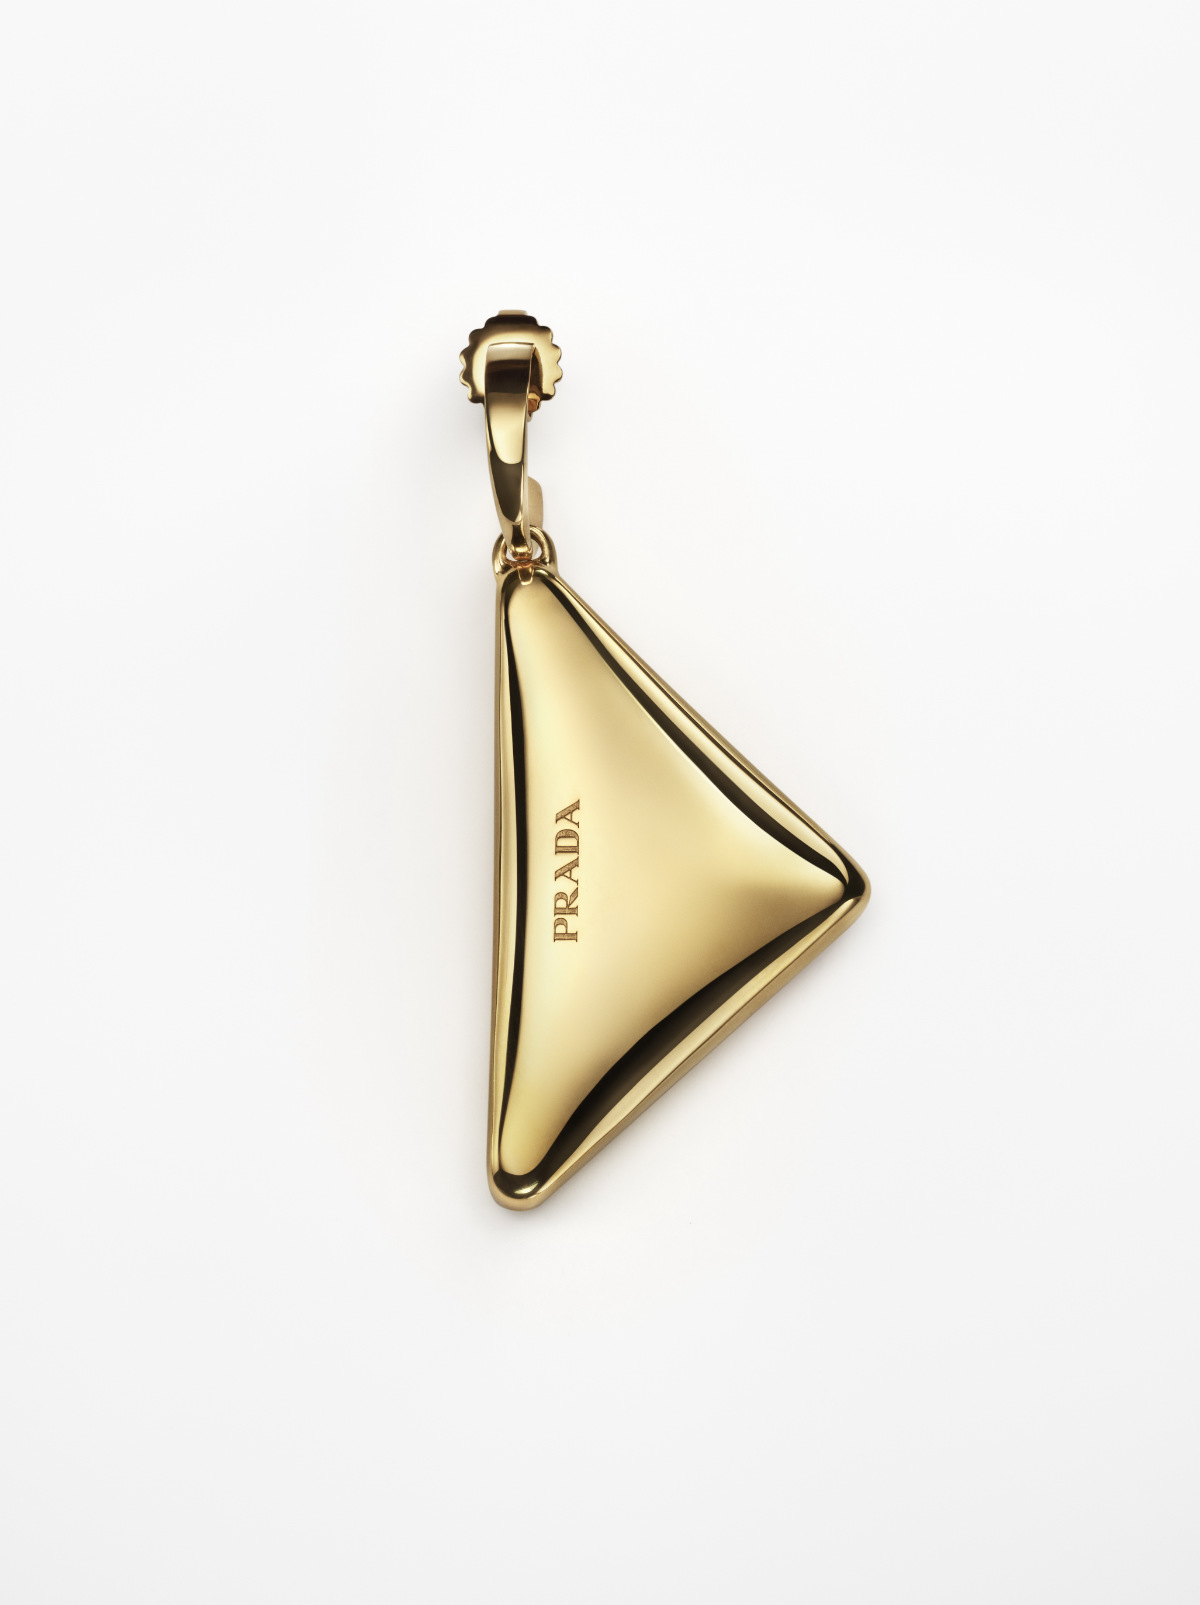 Prada Debuts ETERNAL GOLD, The First Truly Sustainable Fine Jewelry Collection